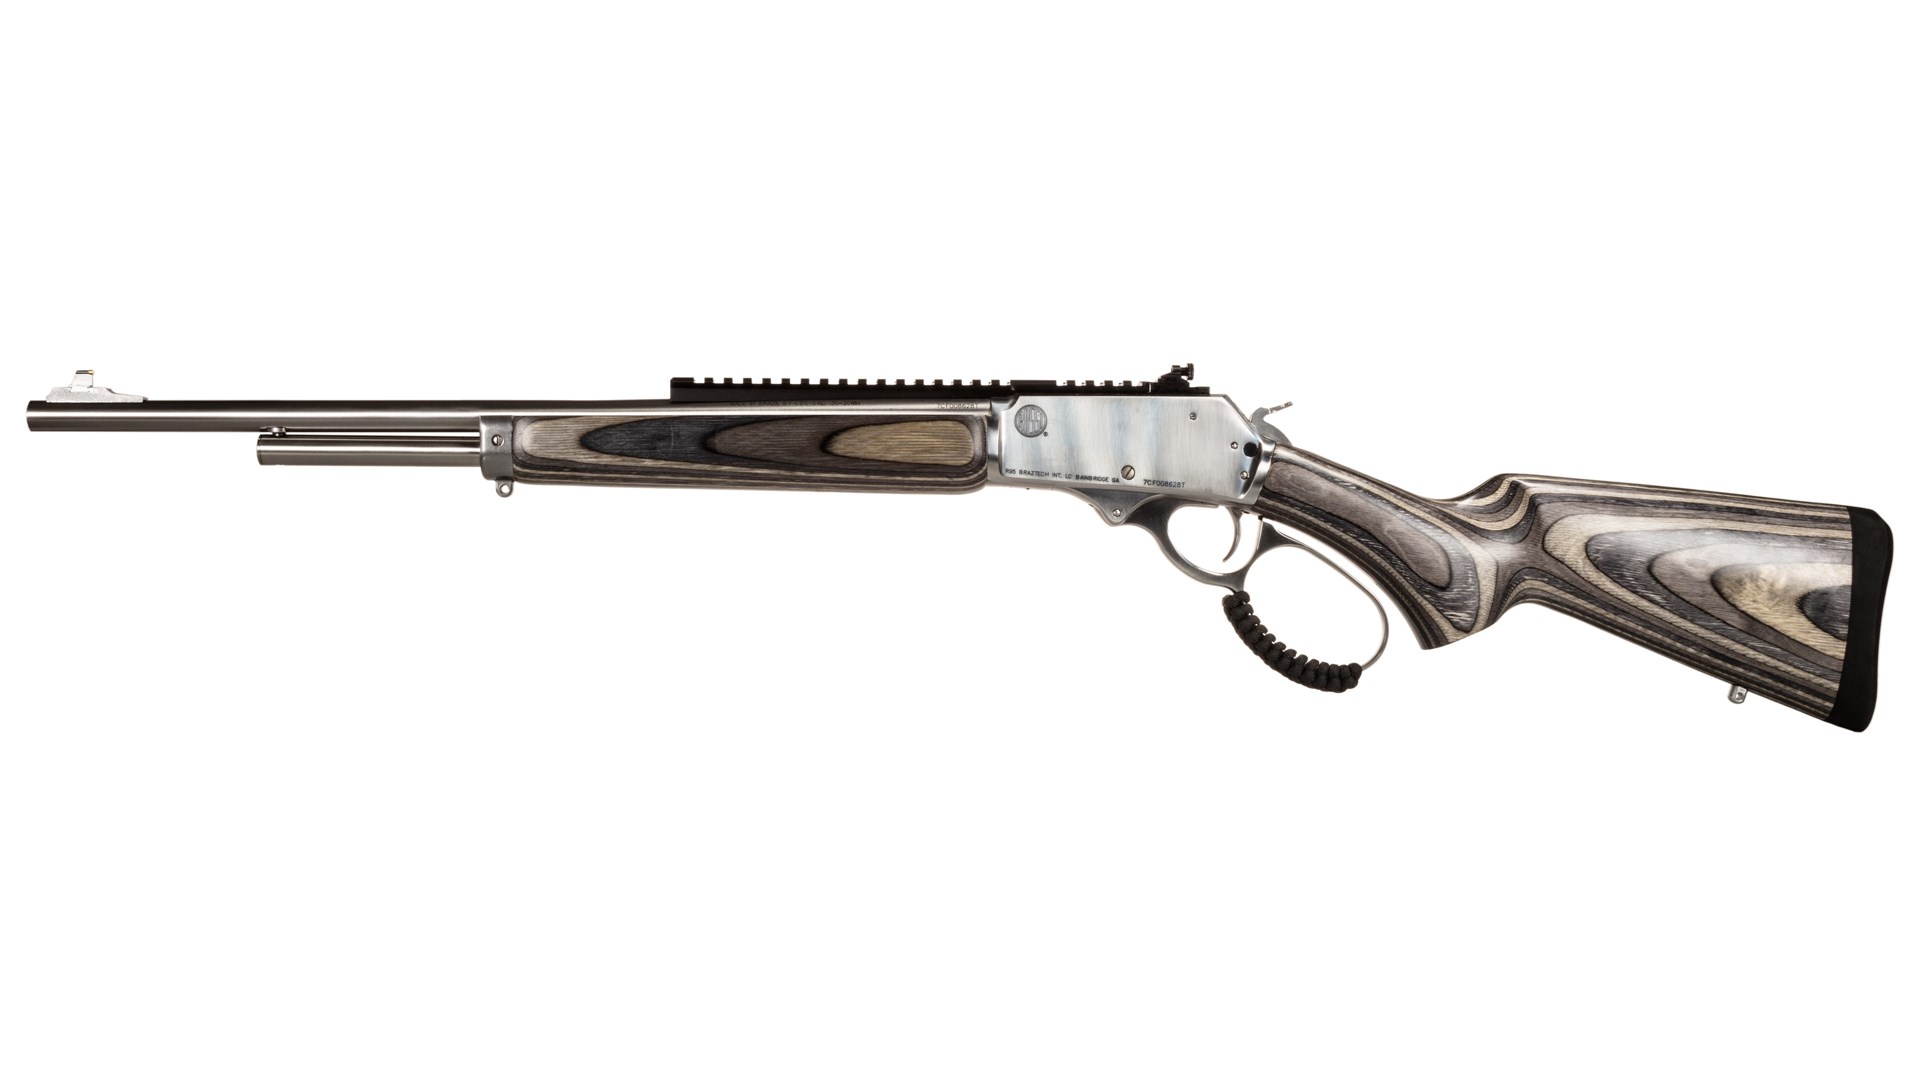 Left side of the Rossi R95 Stainless Steel rifle.